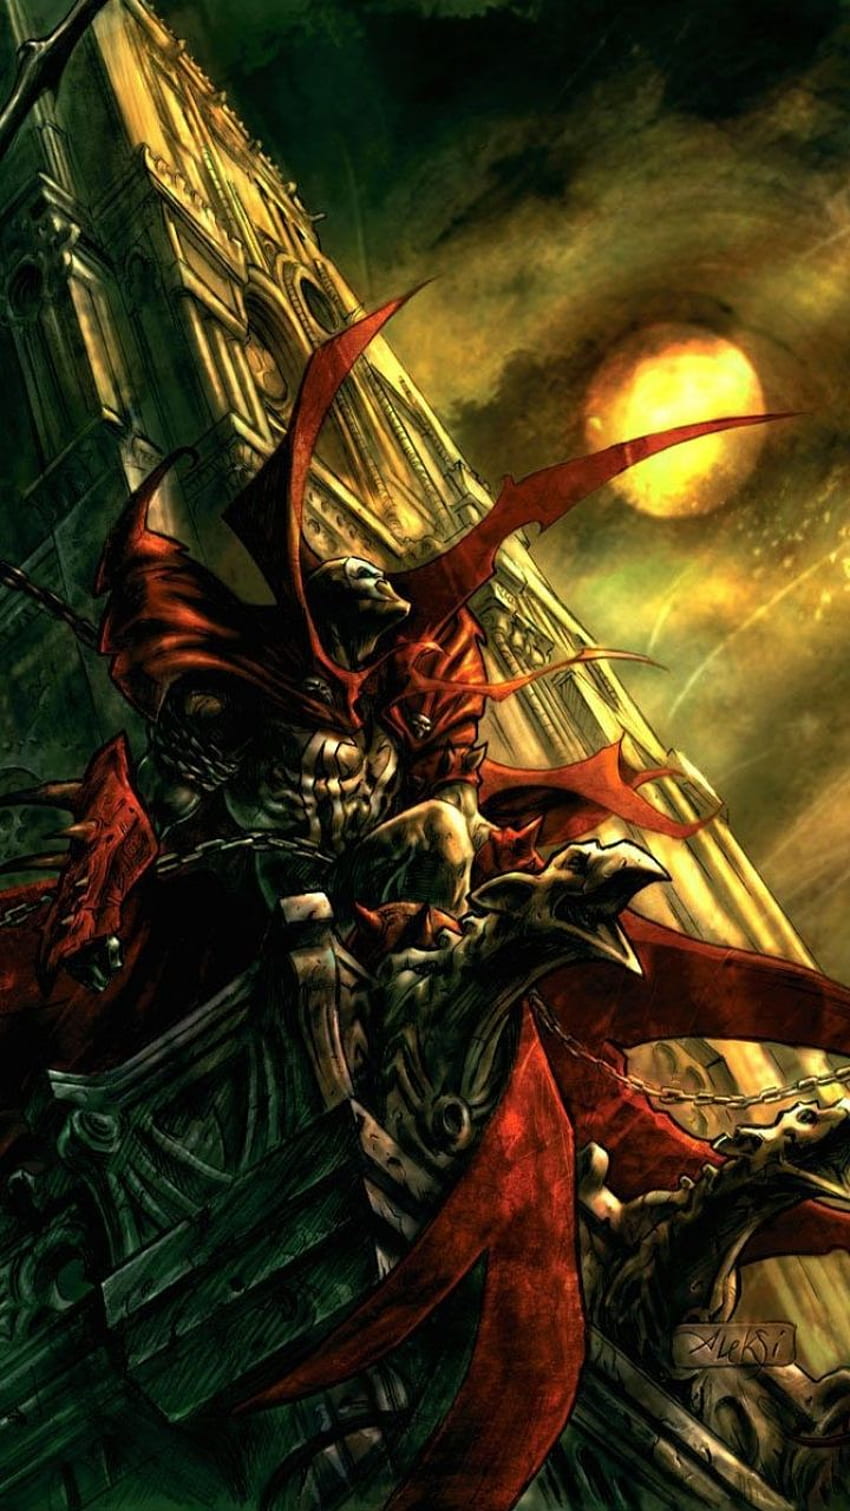 So, I would like to have new mobile to ease my BURNING HYPE for injustice2! So maybe we can have a collection here! I will start with one of my most, Spawn HD phone wallpaper